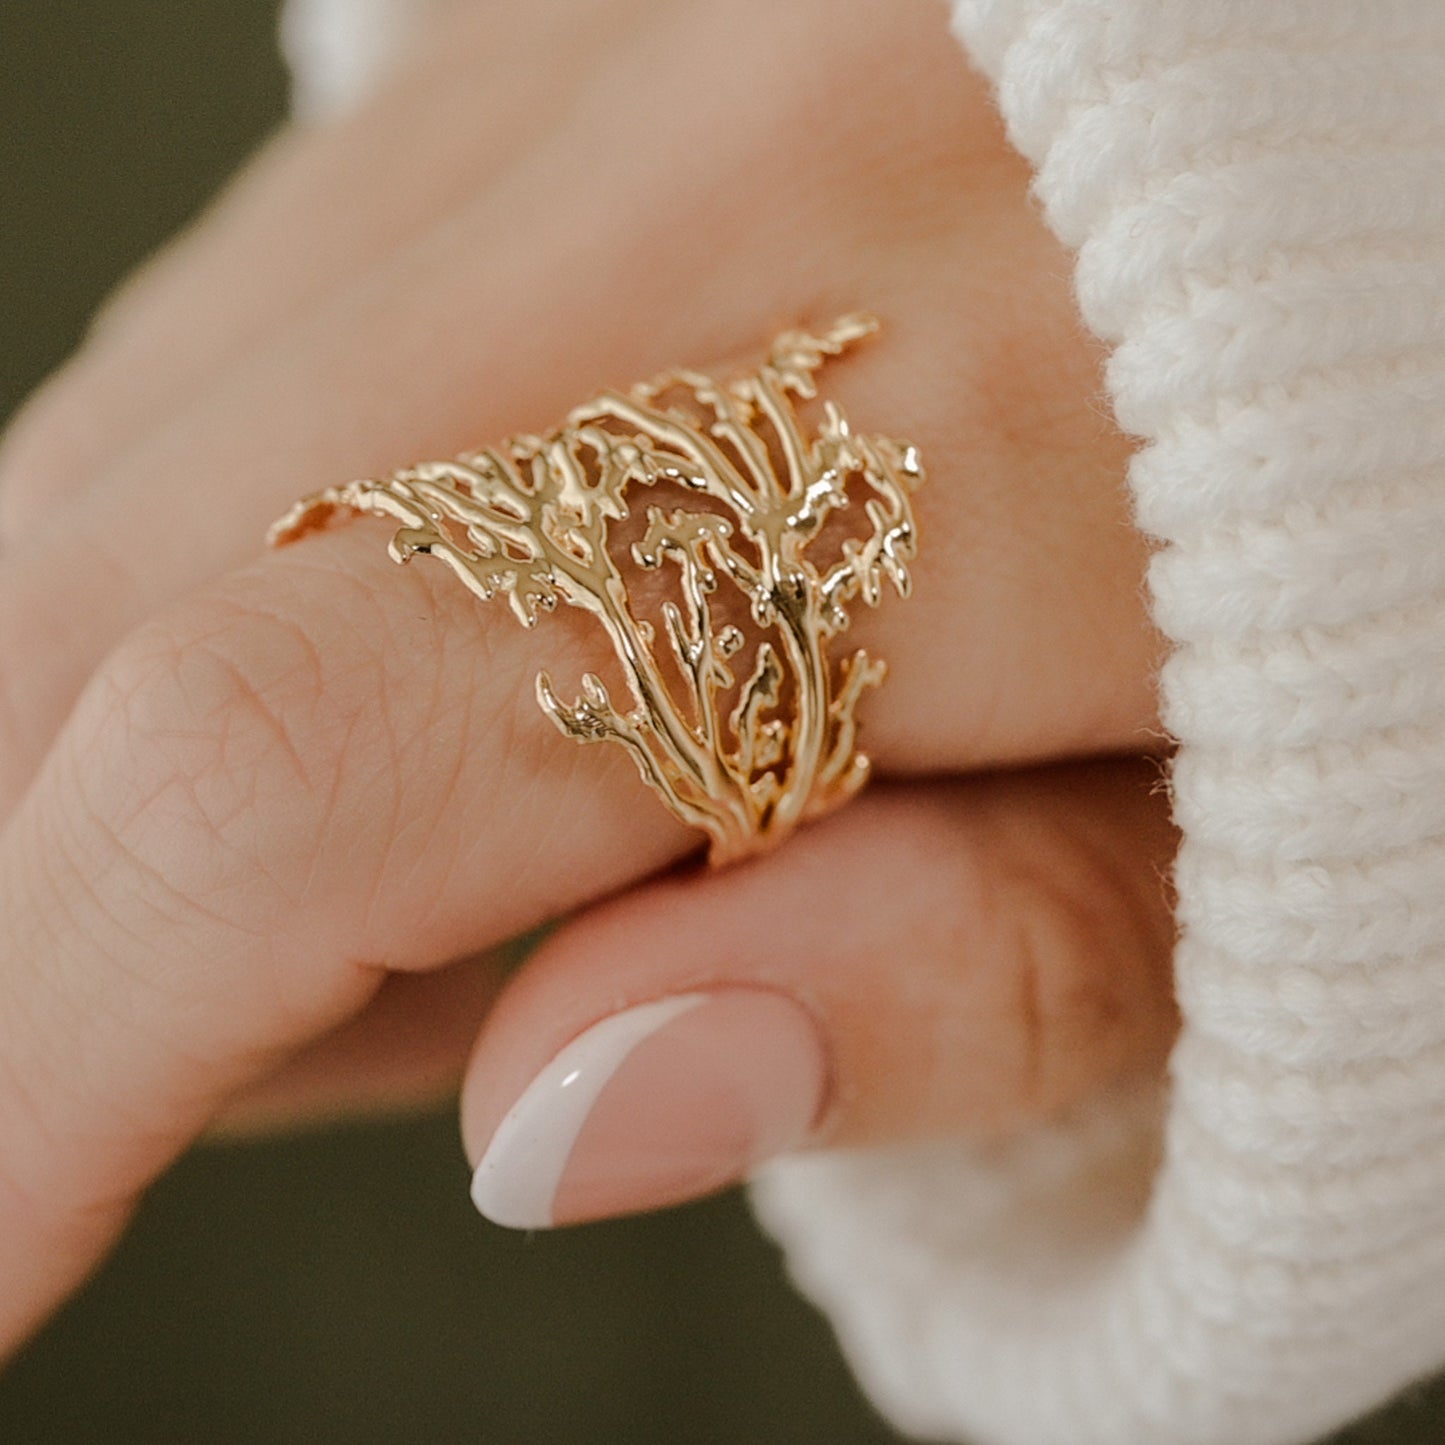 Coral Ring in 14K Yellow Gold, 14k White Gold ,14K Rose Gold